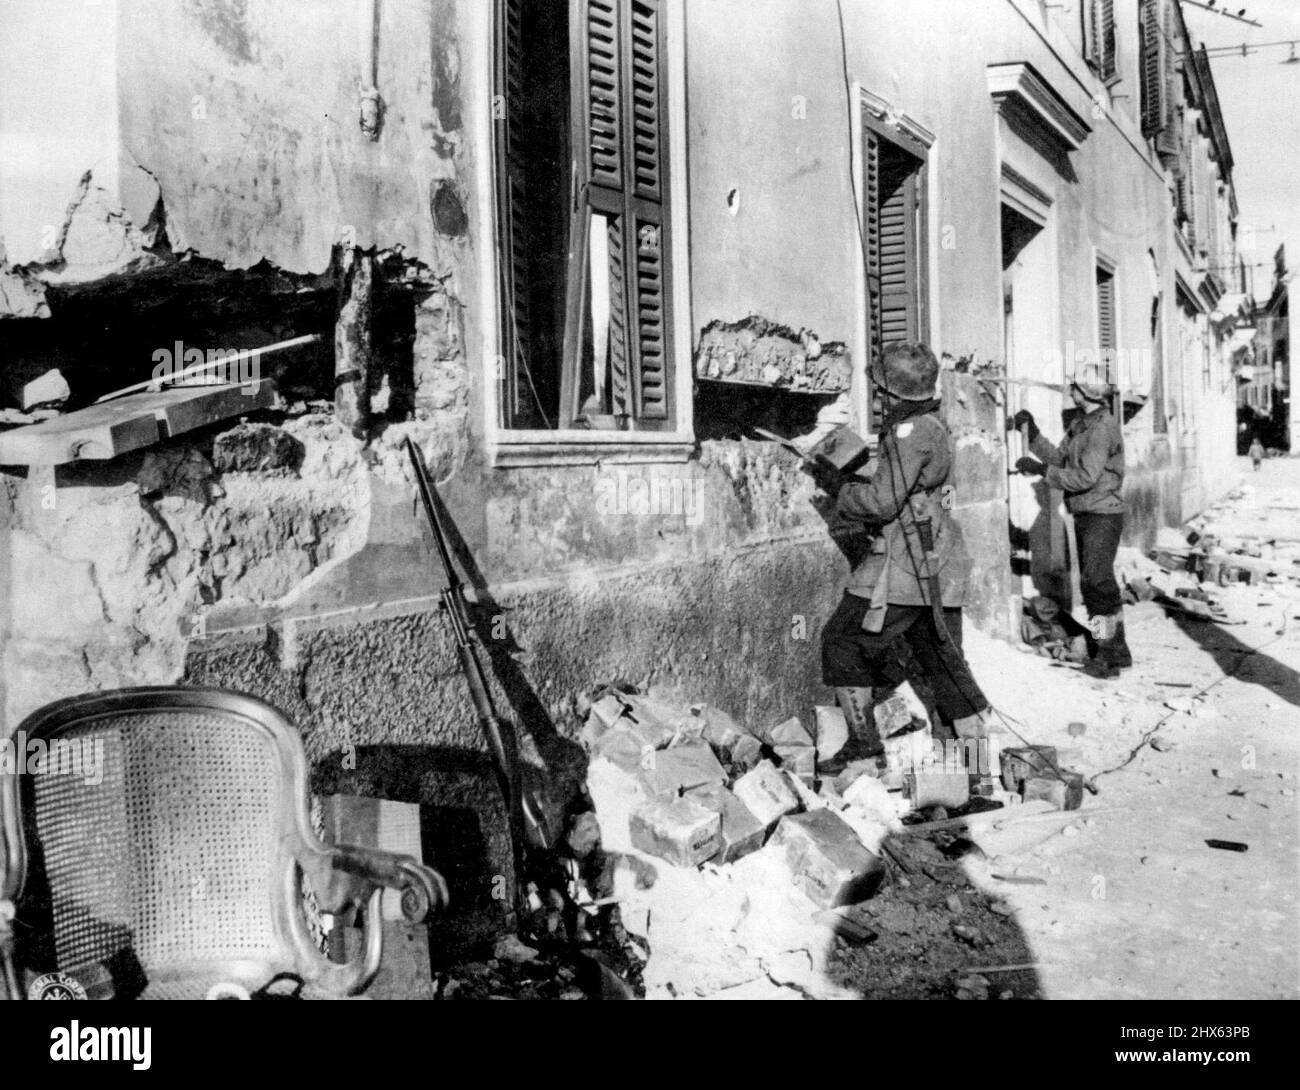 Yanks Remove Explosives in Anzio: U.S. Army engineers dig out explosives buried in the sides of a building beside the docks at Anzio by Germans with the intention of blocking the docks to use by allies at newest Italian beachhead. February 29, 1944. (Photo by Associated Press Photo). Stock Photo